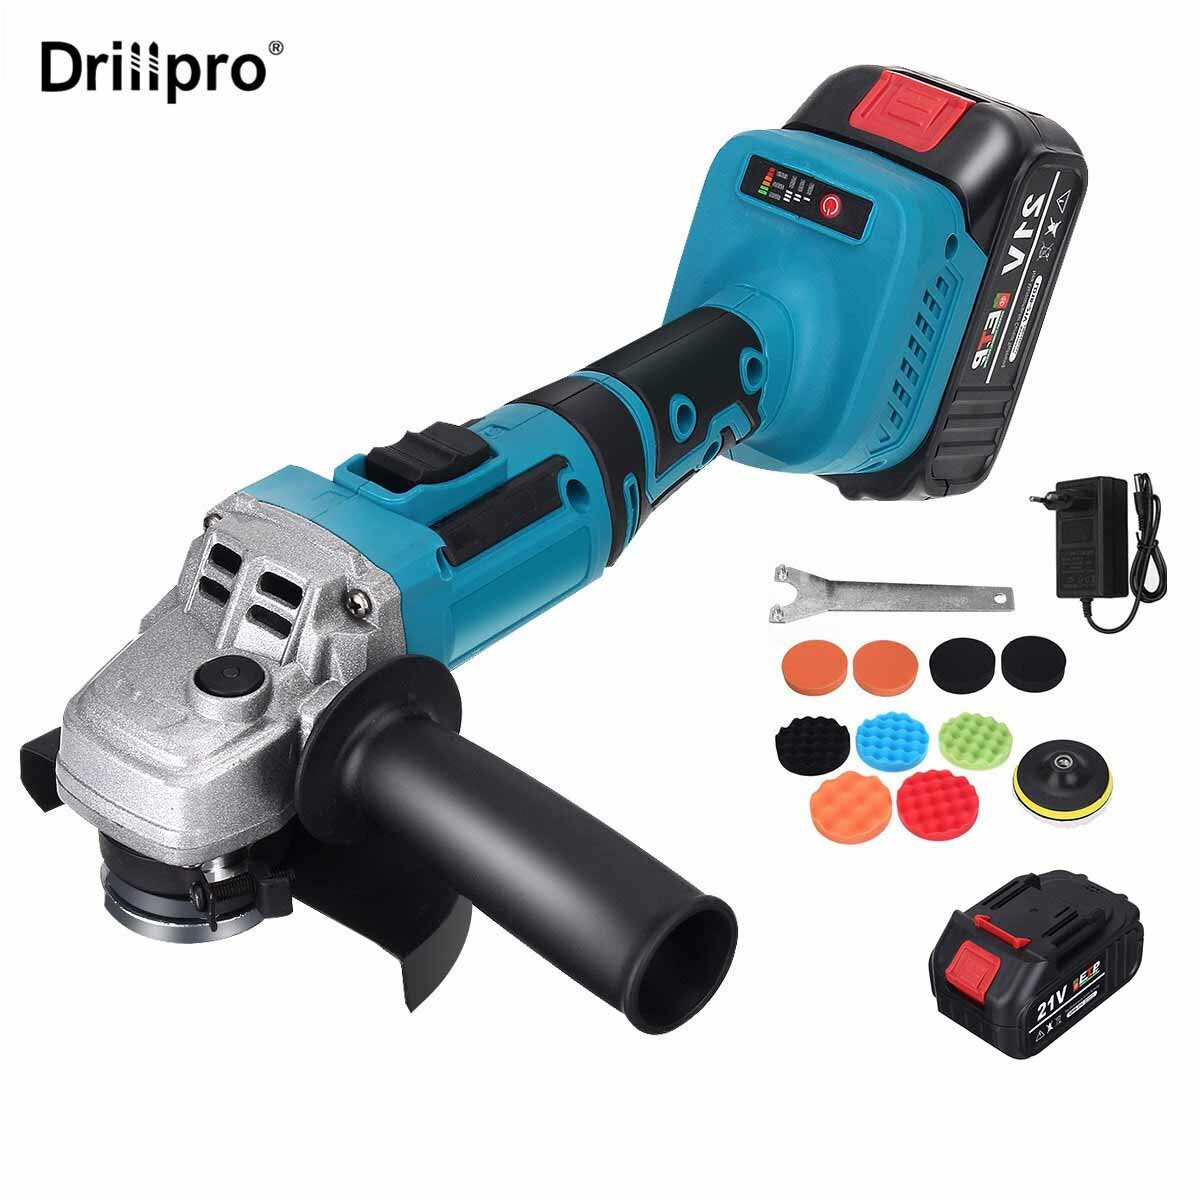 Image of Drllpro 800w 21v 5 Inch 10000rpm 6000mah Lithium Battery Electric Polisher For Car Polishing Clean The Sink And Tub Sand